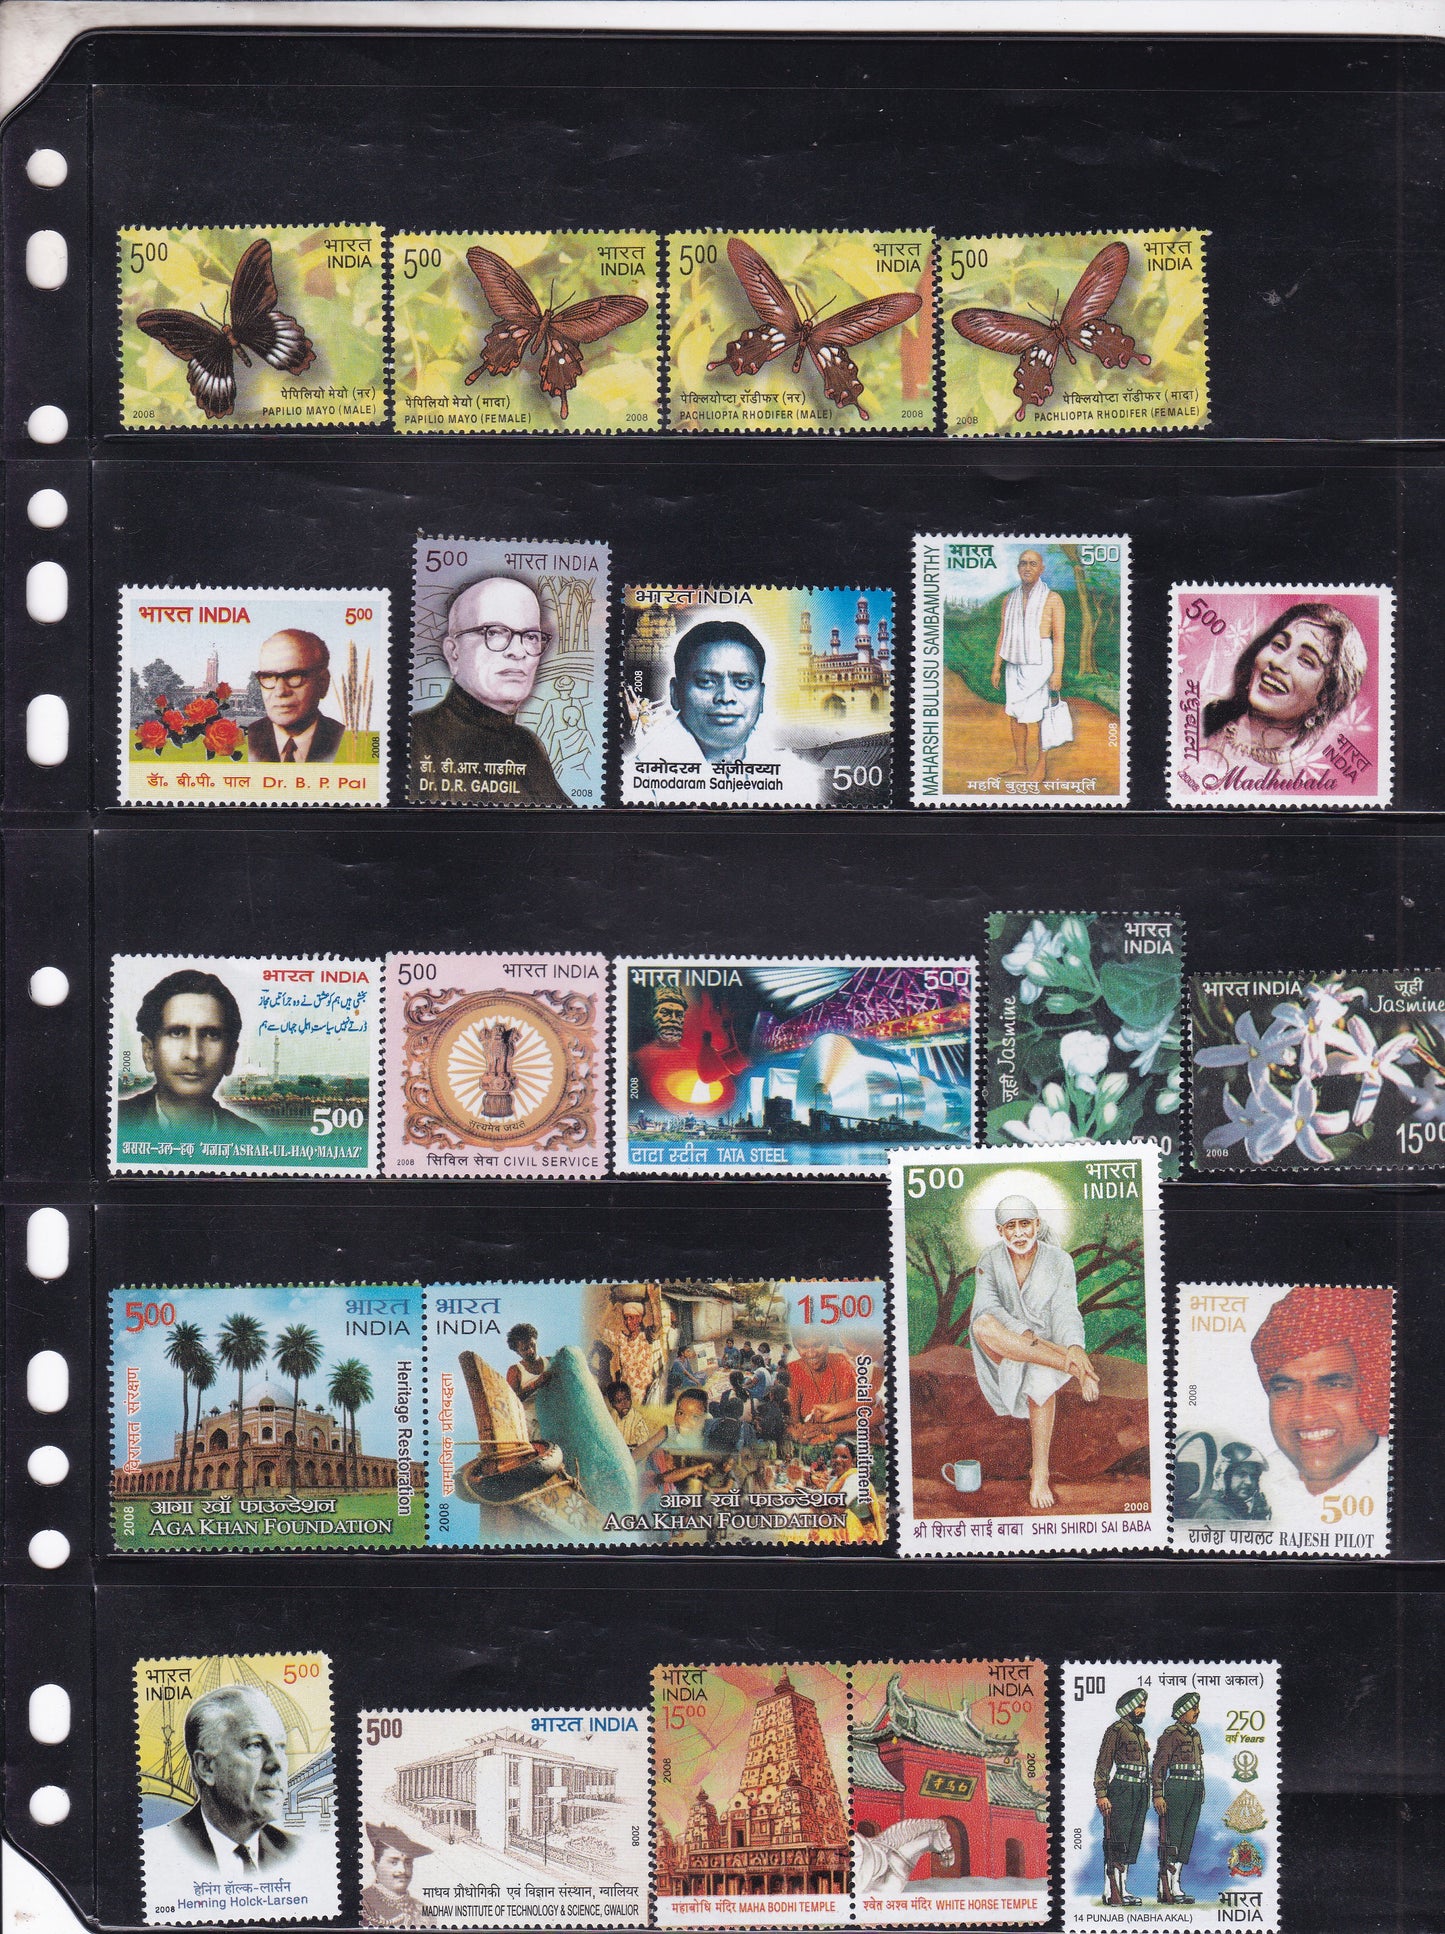 India-2008 Full Year pack MNH Stamps.